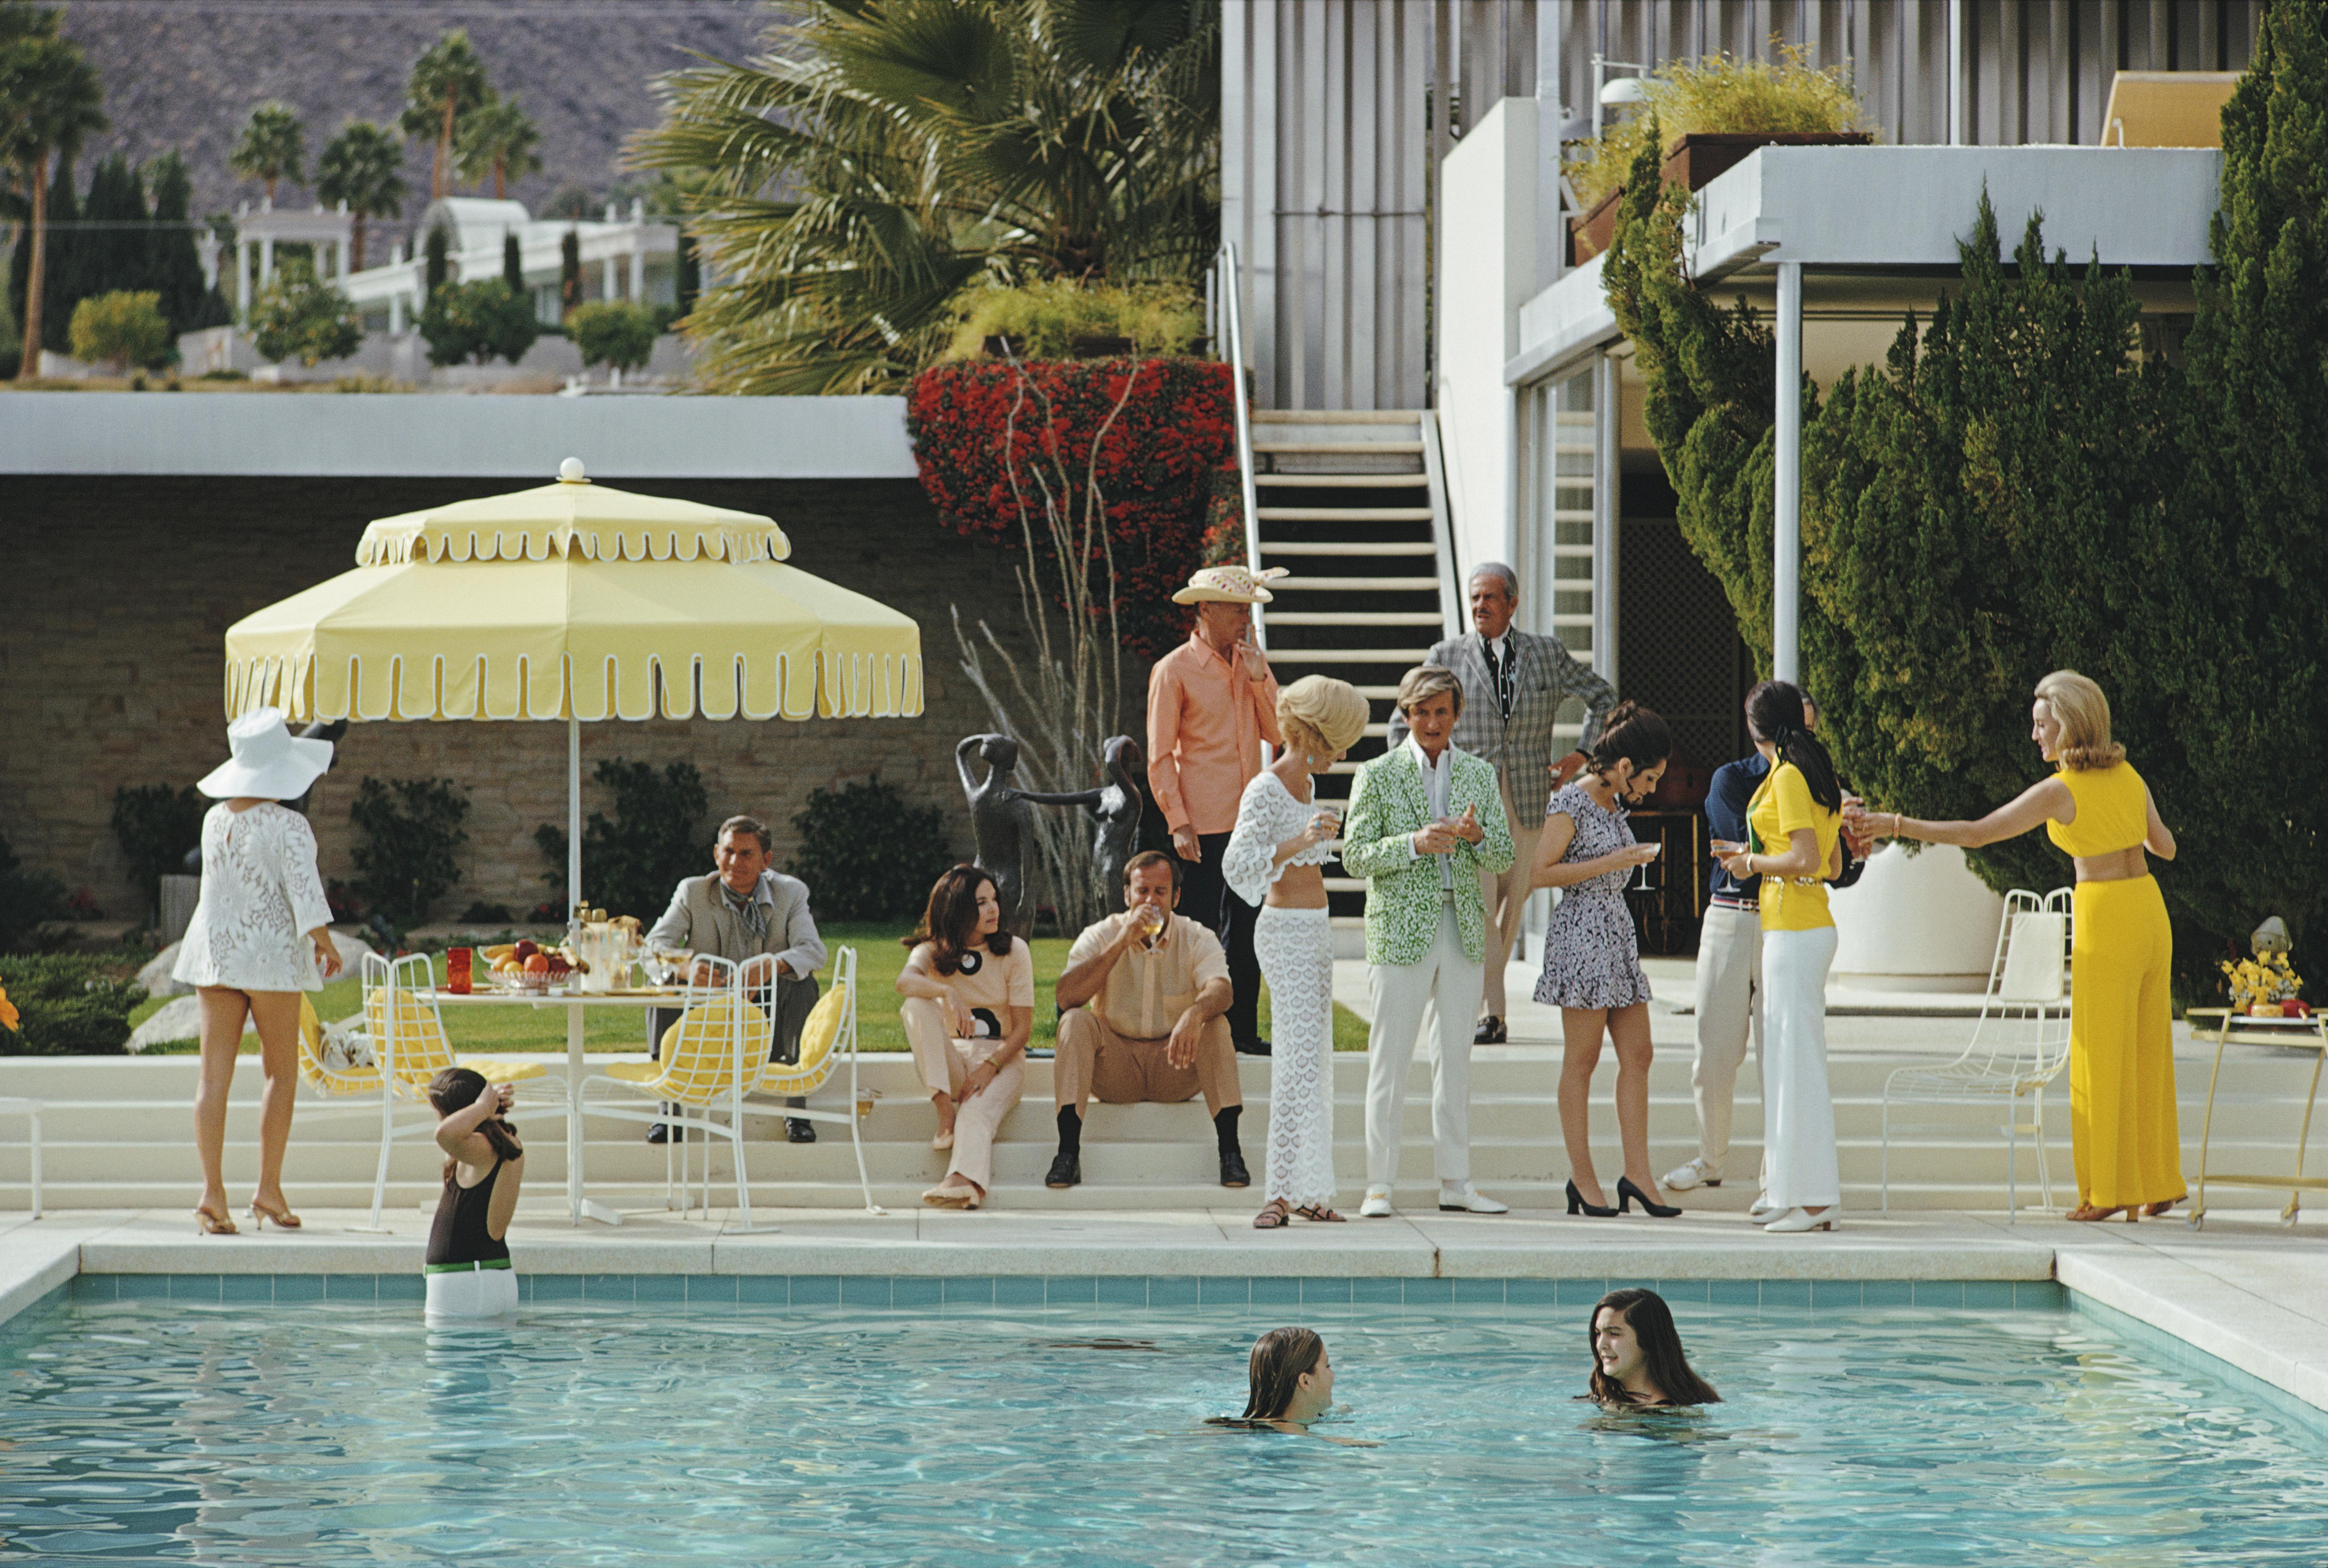 Slim Aarons
Kaufmann Desert House, 1970. (printed later)
C print 
Estate stamped and numbered edition of 150 
with Certificate of authenticity

A poolside party at a desert house, designed by Richard Neutra for Edgar J. Kaufmann, in Palm Springs,